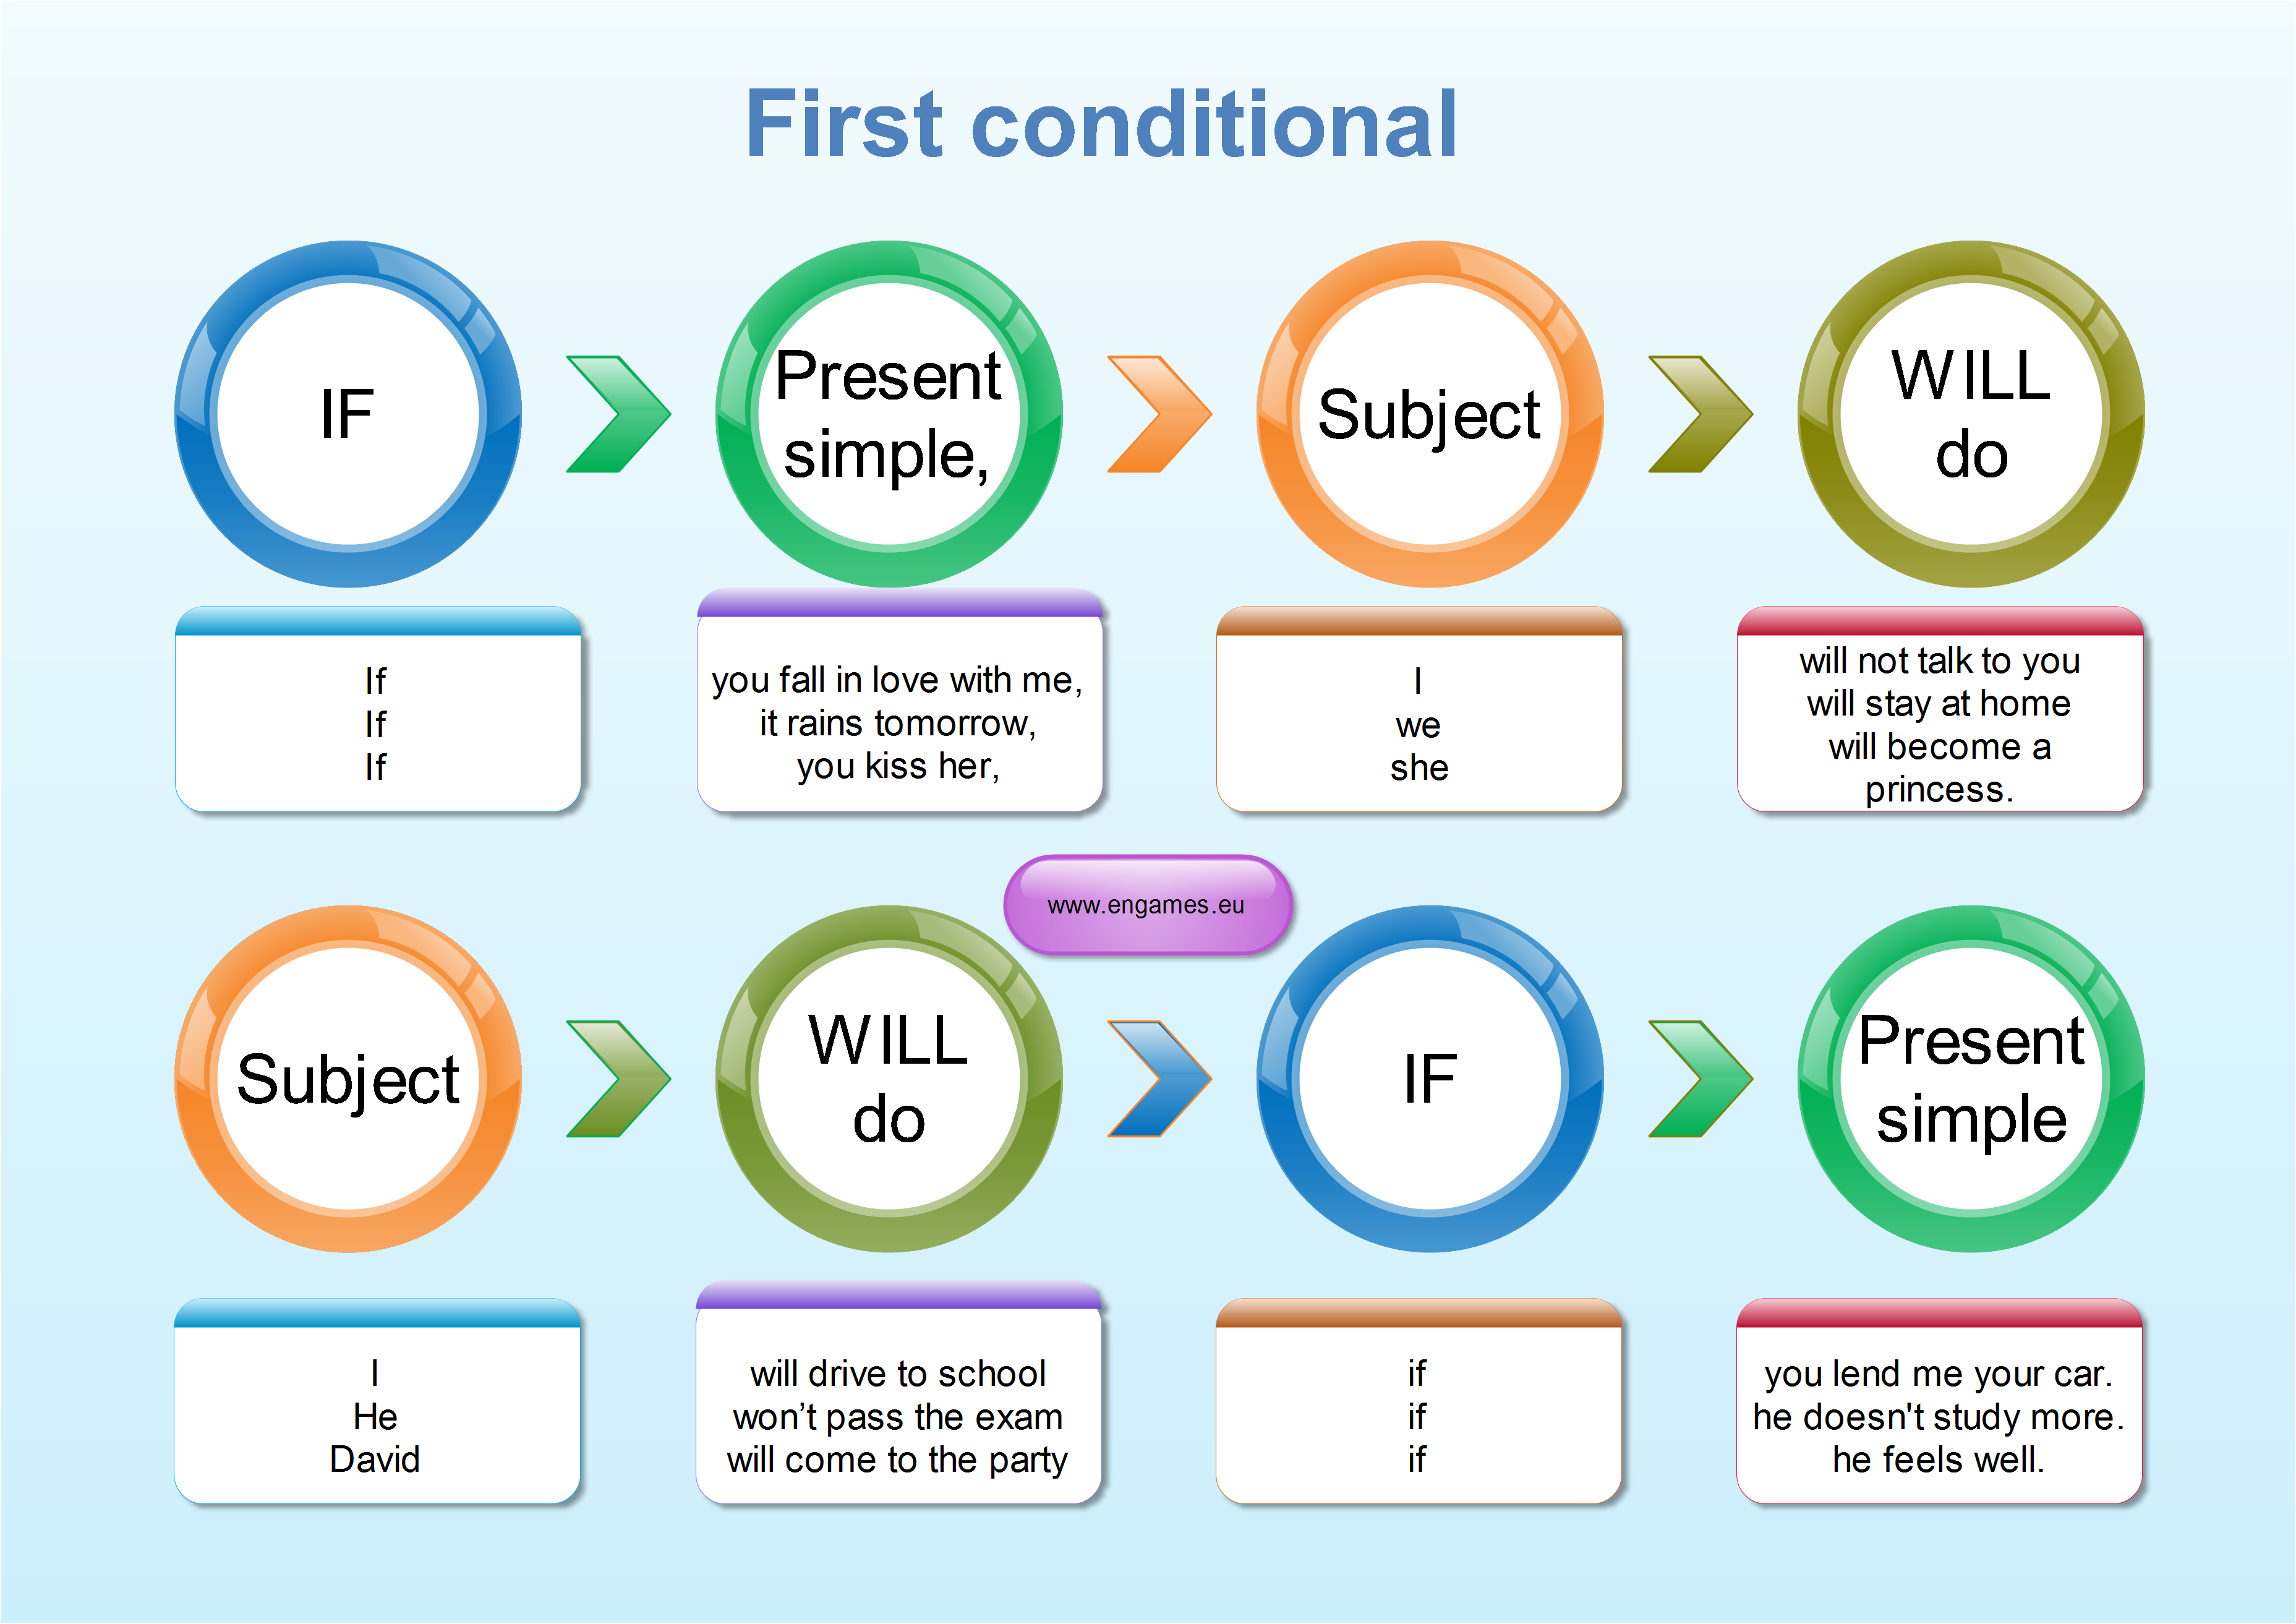 Английский first conditional. 1st conditional формула. First condition английском языке. First conditional. First conditional правило.